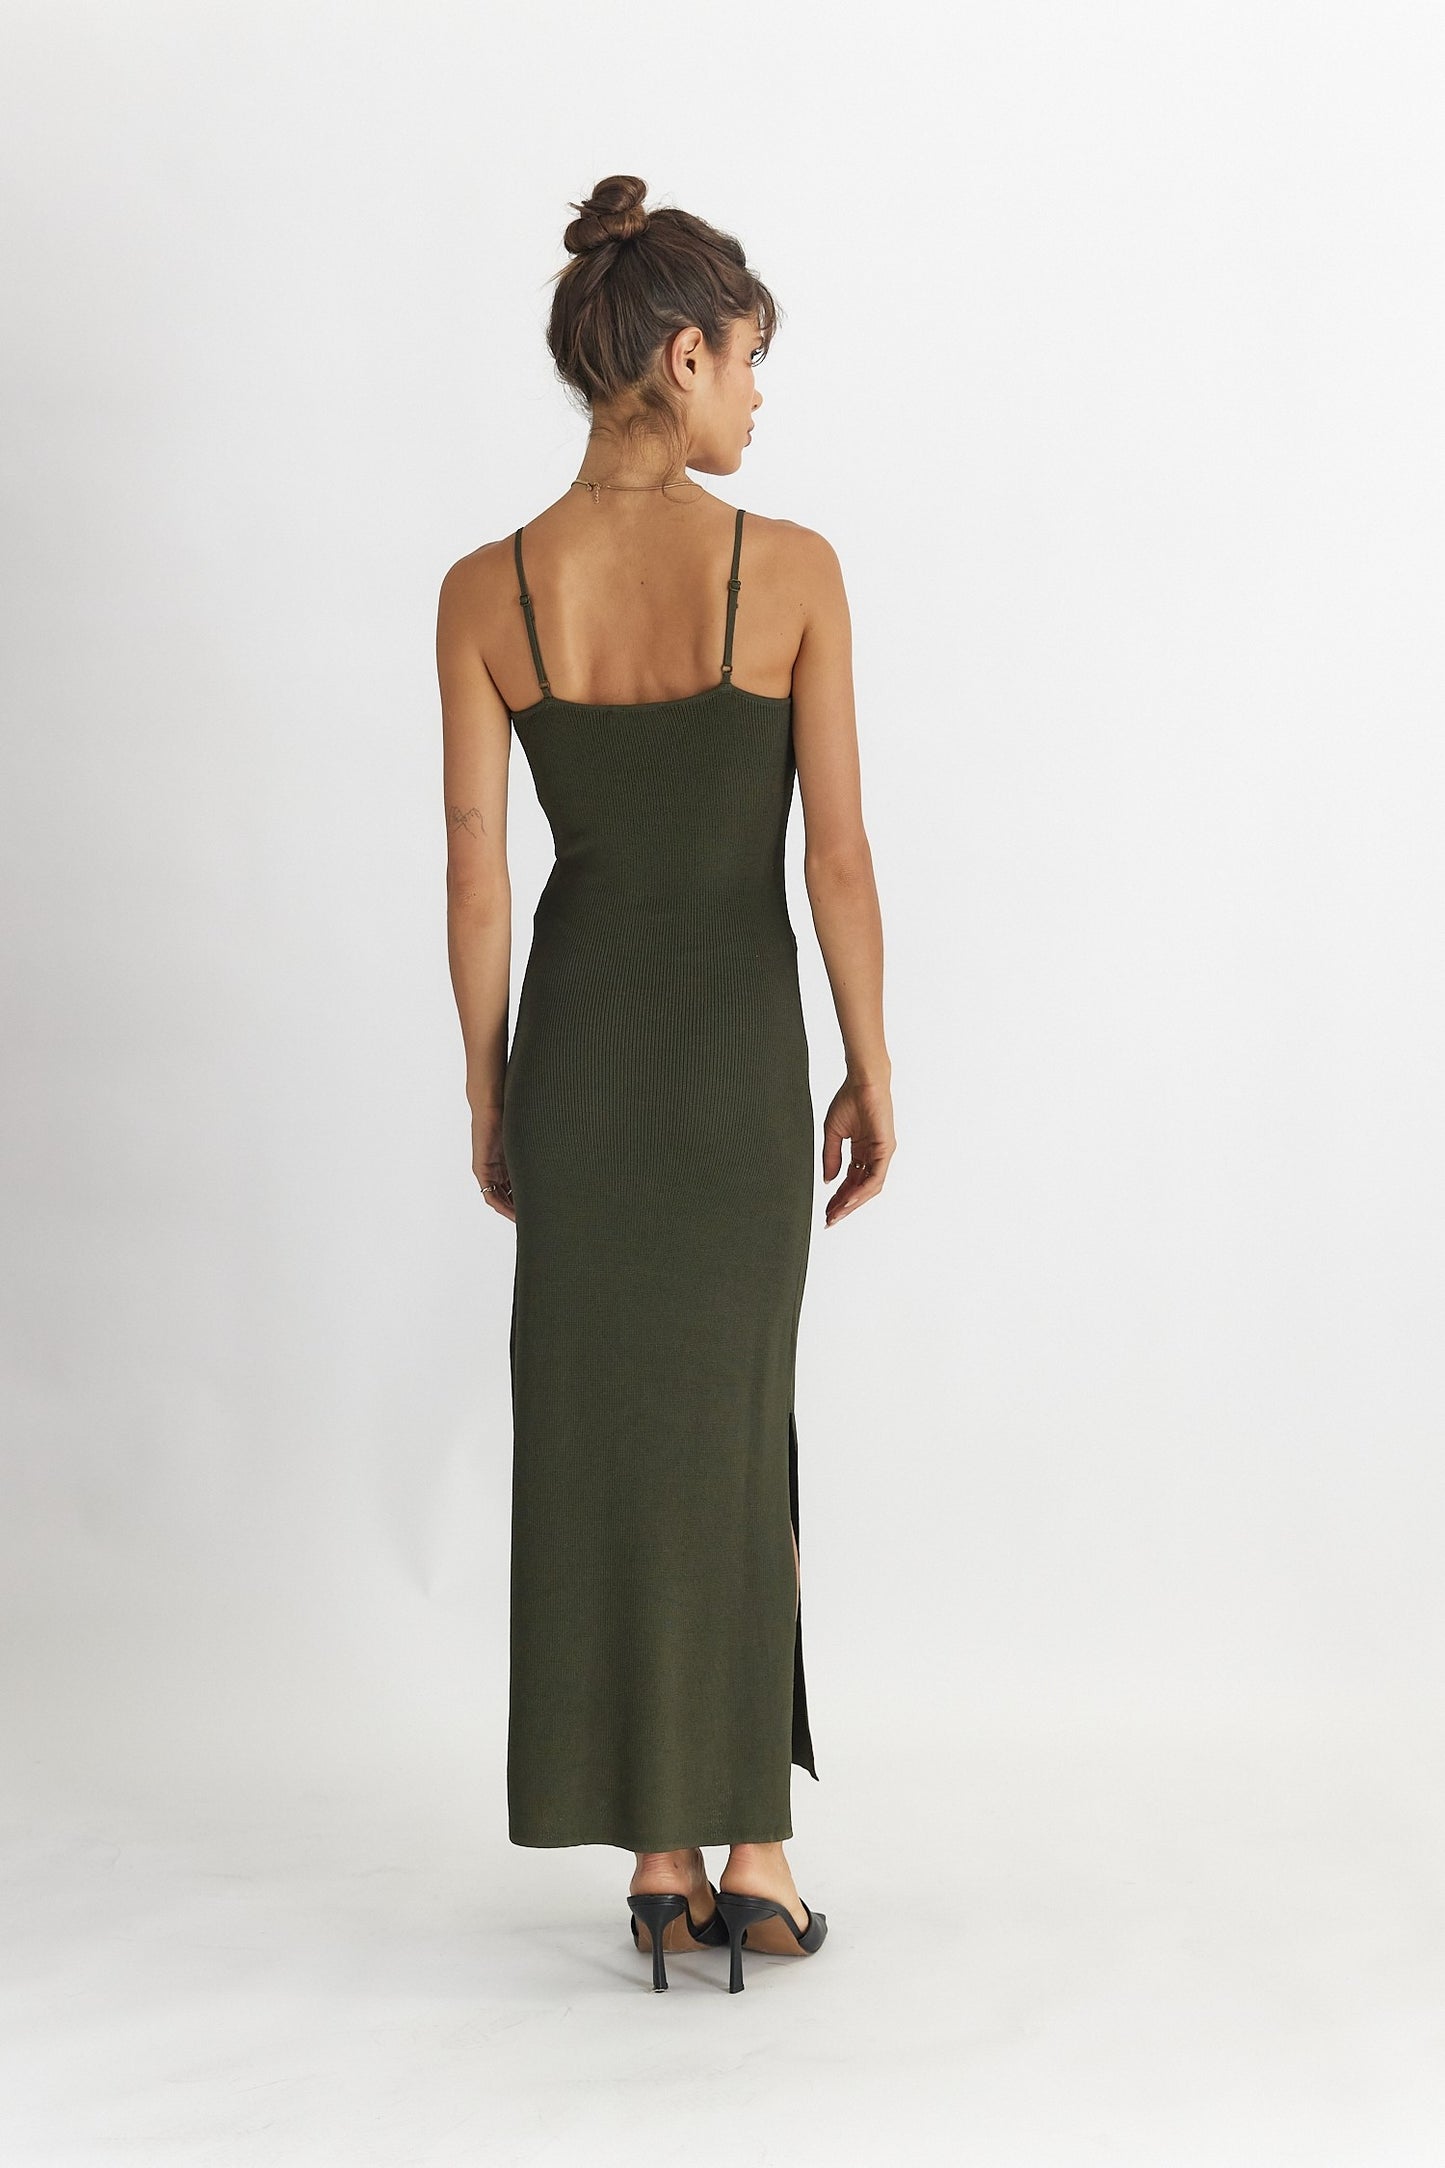 All : Row, The Francine Dress in Olive - Boutique Dandelion